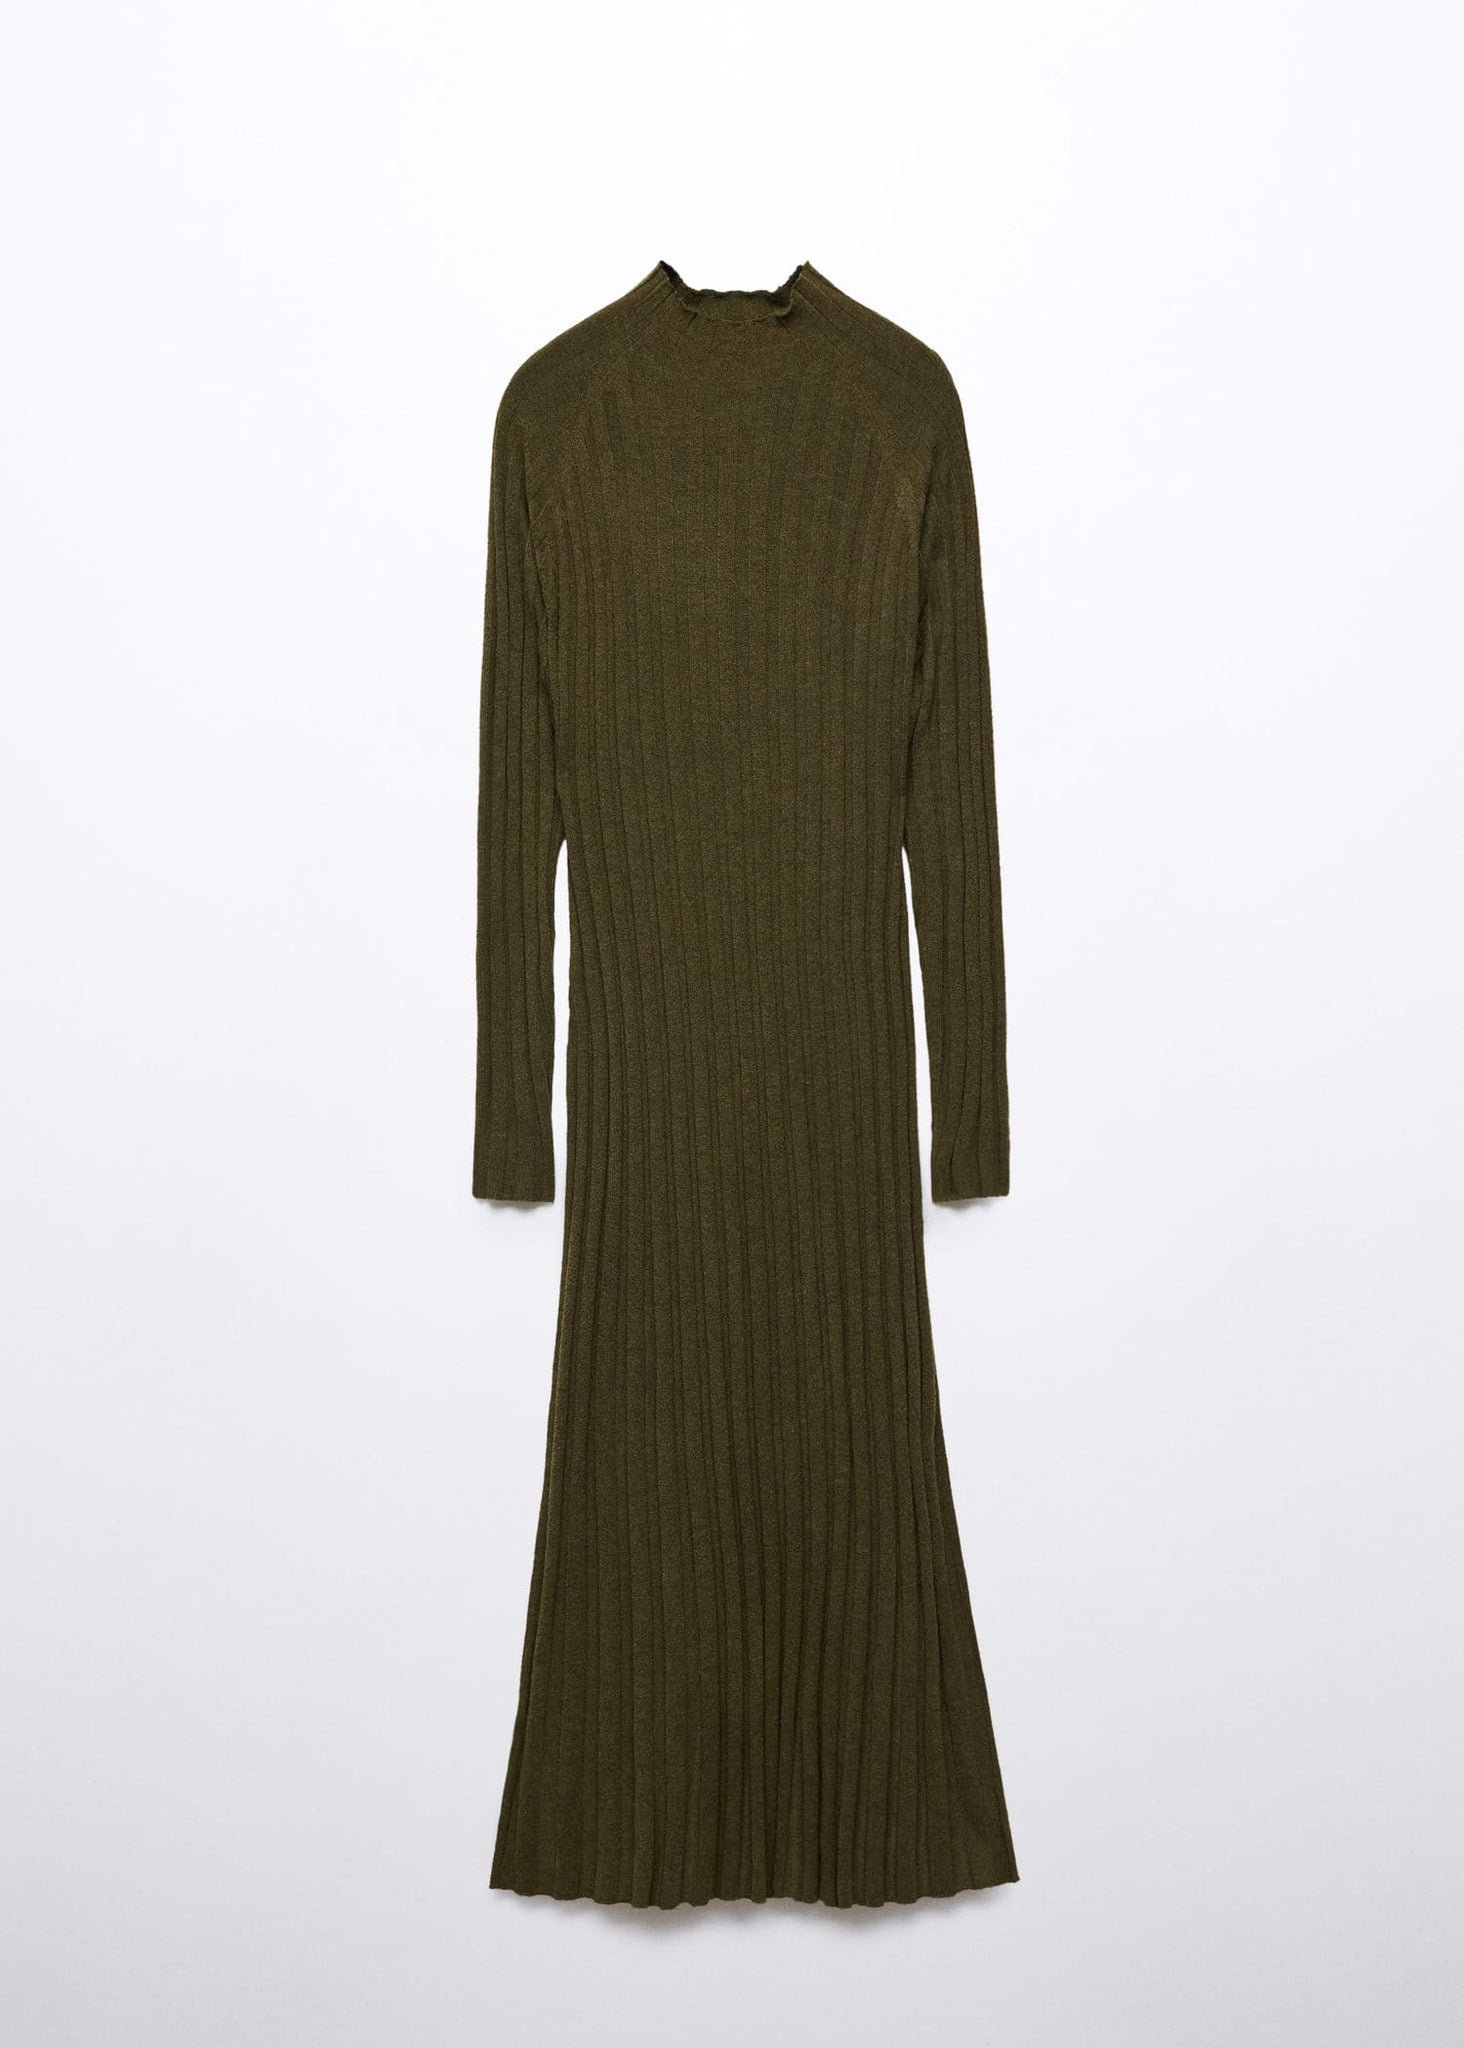 Perkins-neck ribbed dress - Article without model